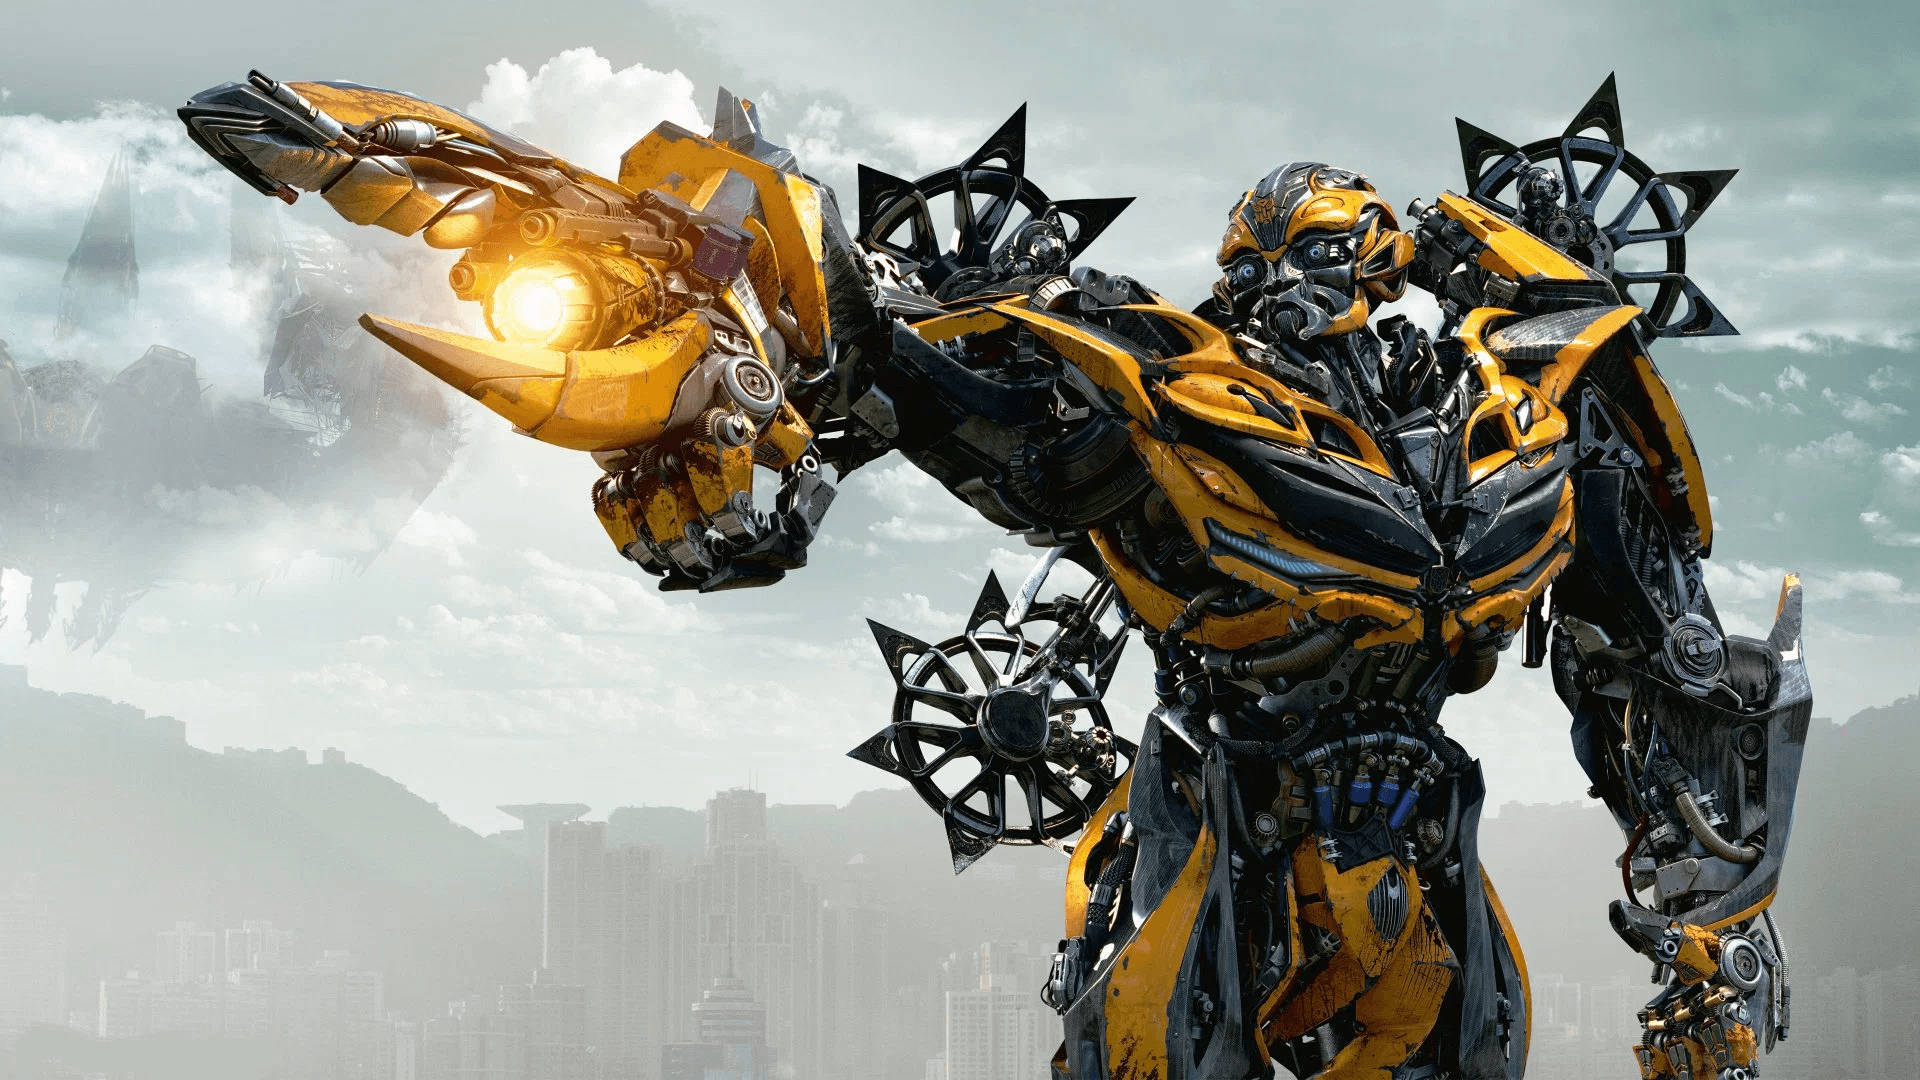 Bumblebee Transformers The Last Knight Wallpaper